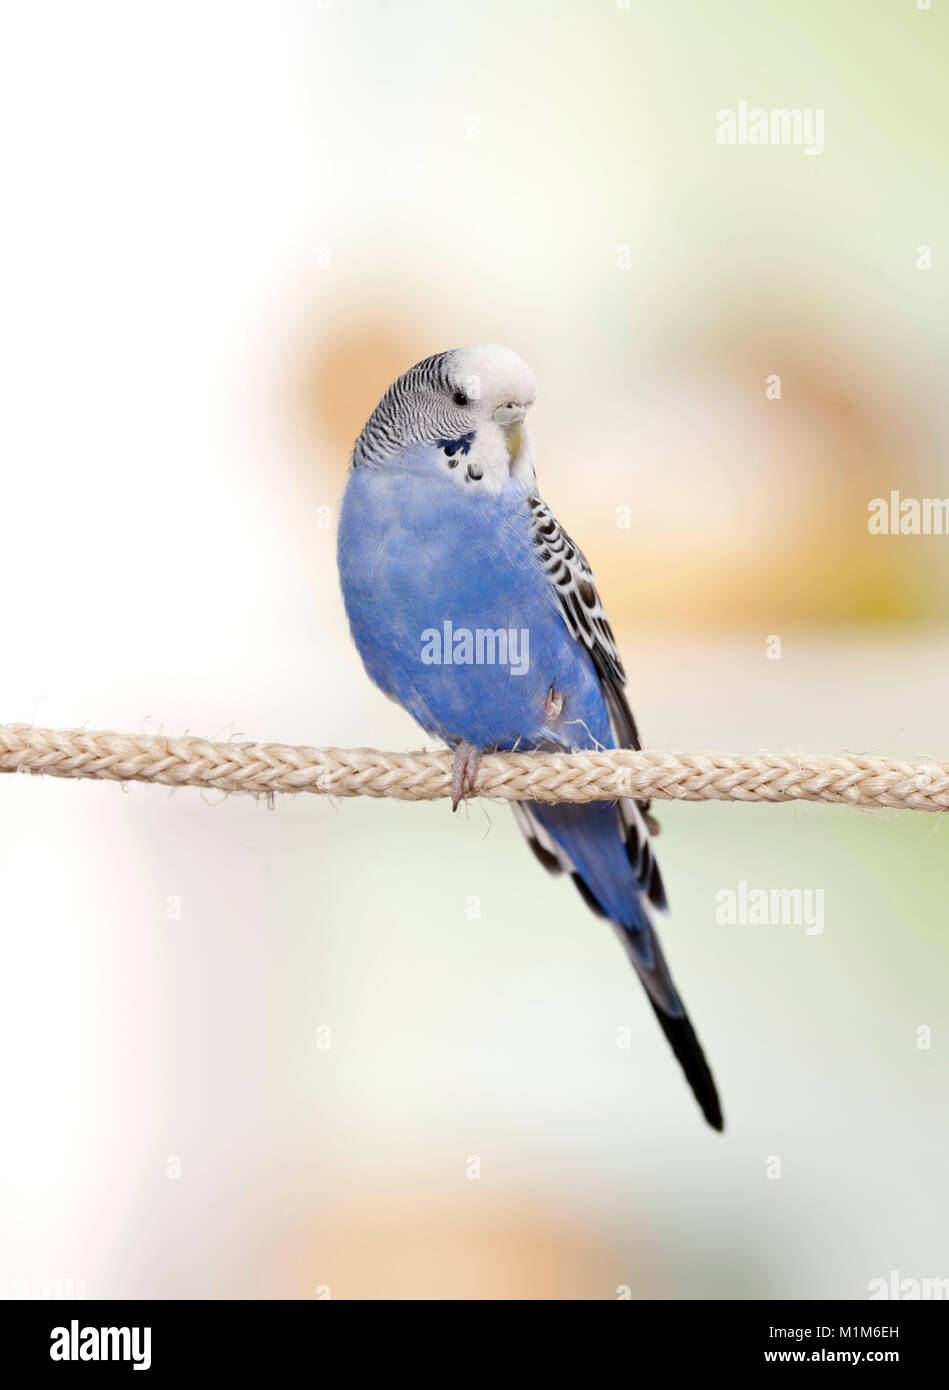 Budgerigar, Budgie (Melopsittacus undulatus). Blue bird perched on a rope. Germany Stock Photo